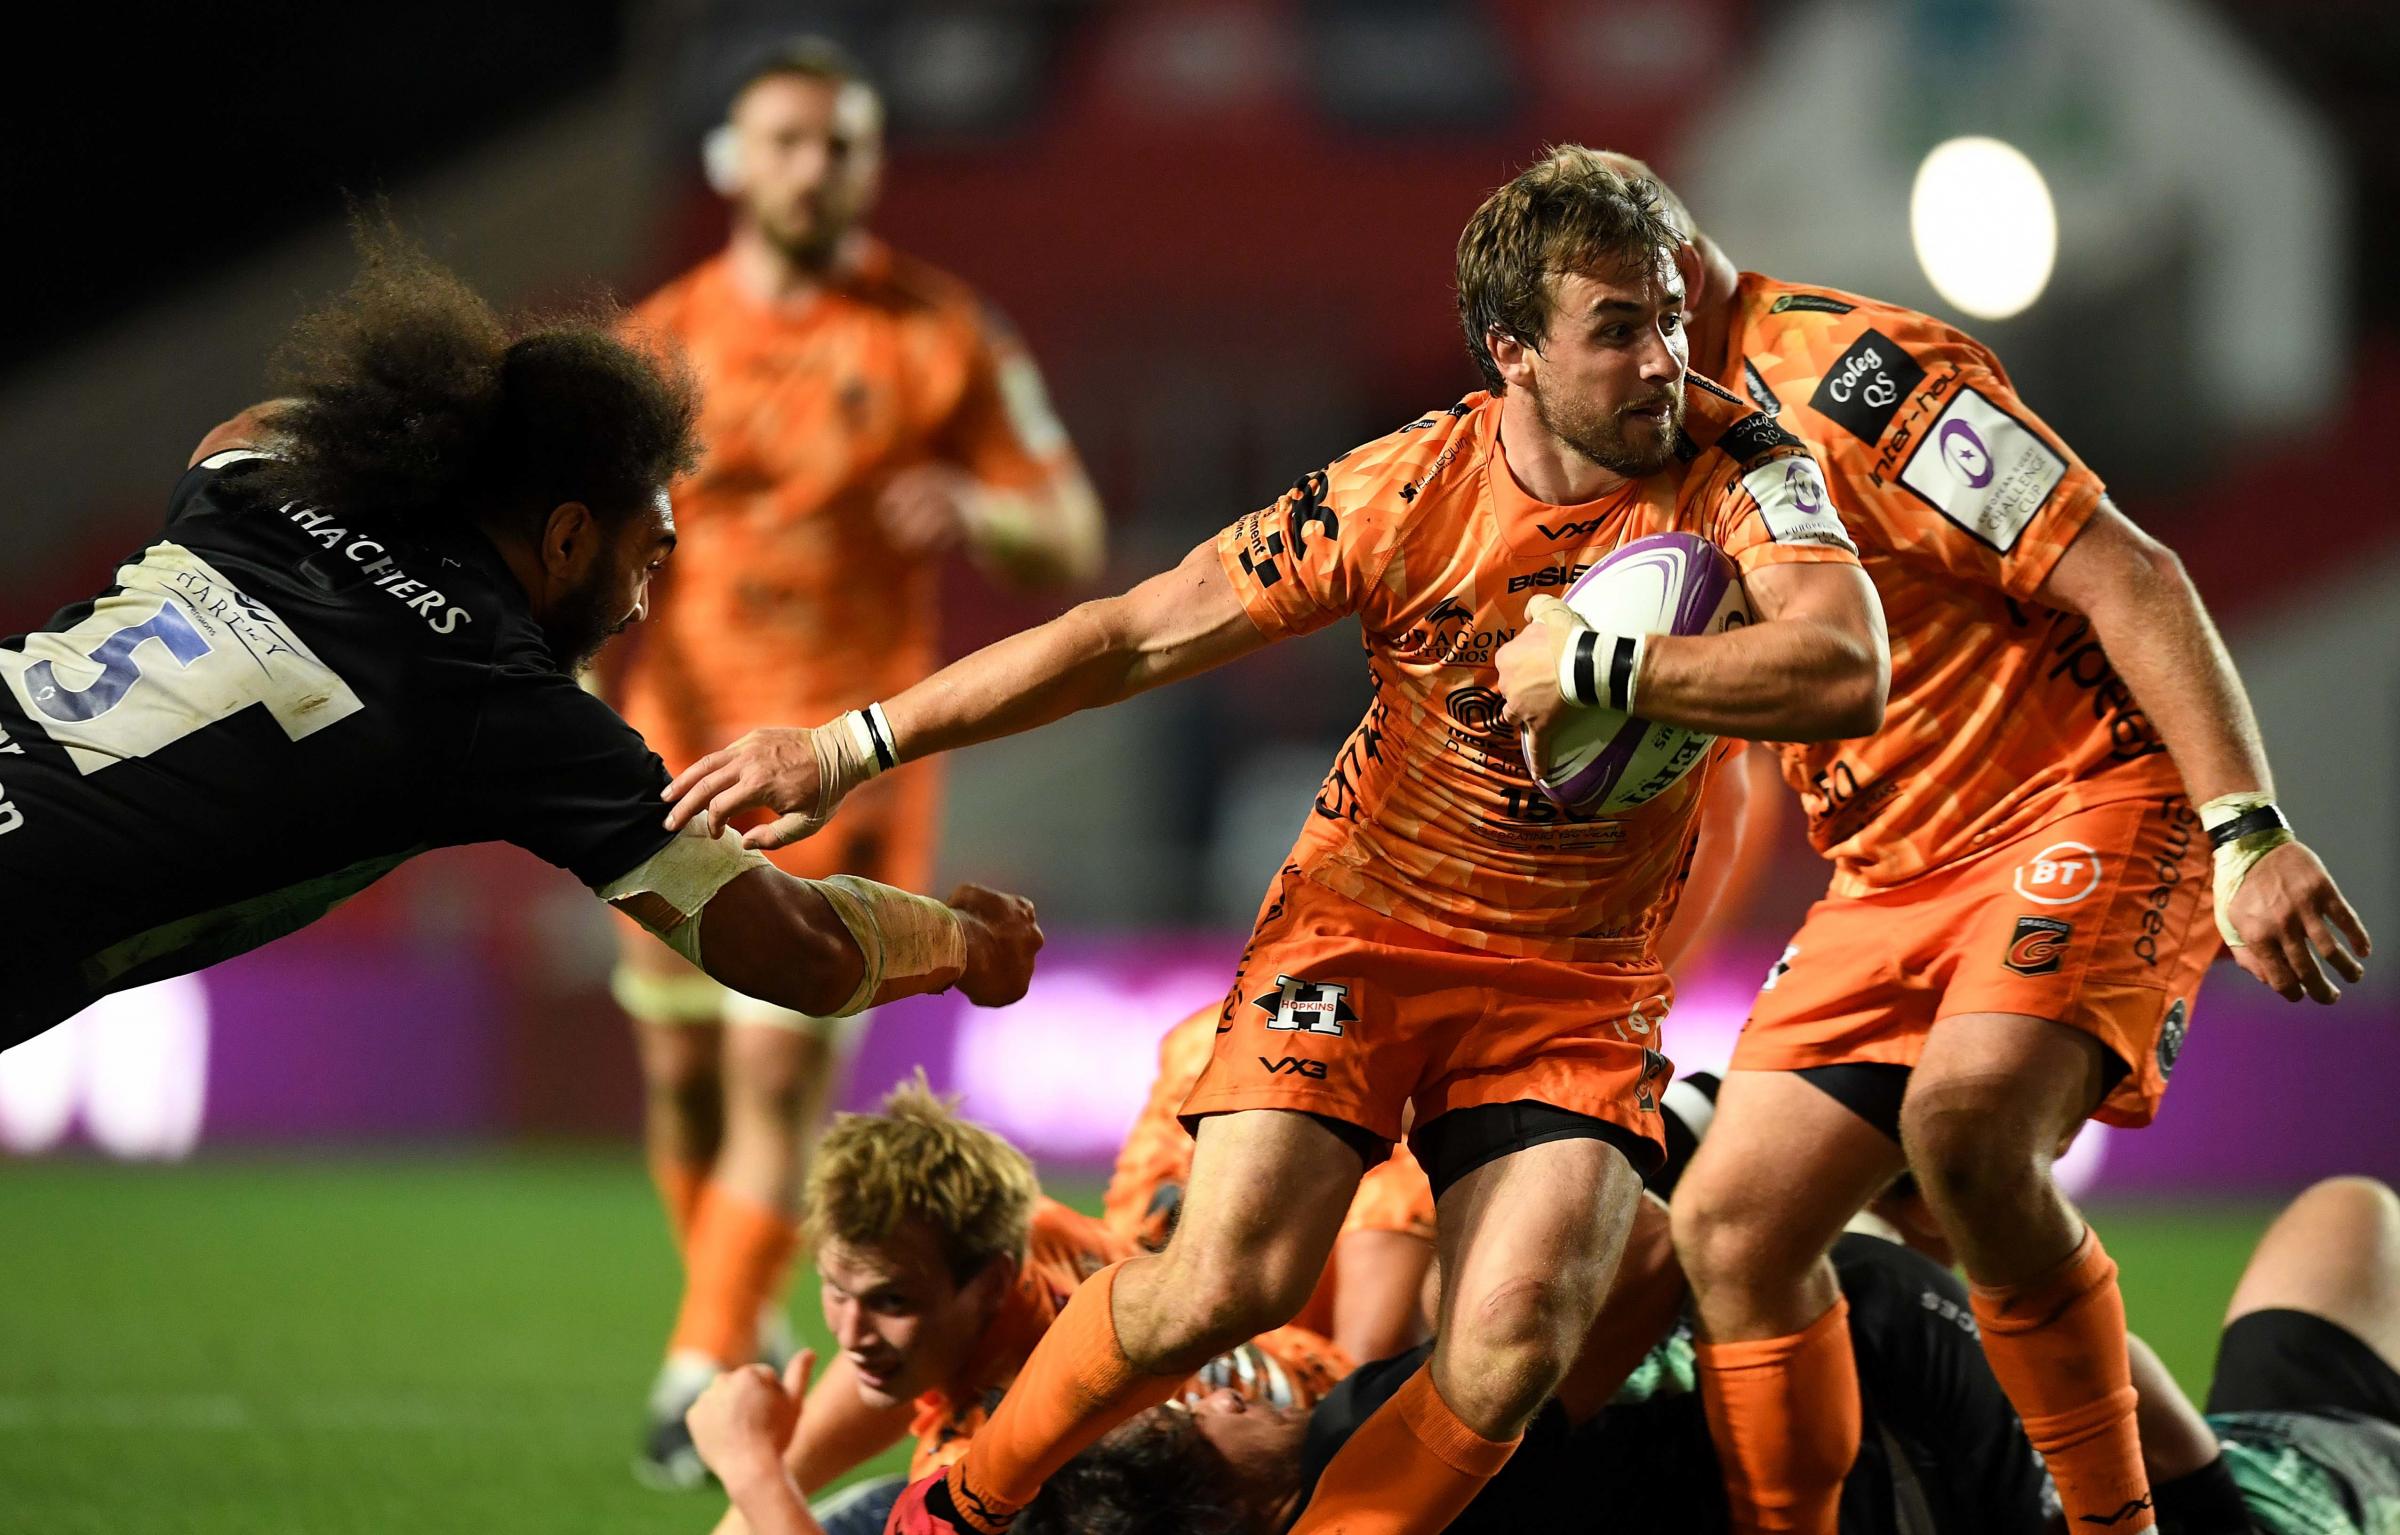 SNIPE: Rhodri Williams goes for a gap in the Dragons clash with Bristol